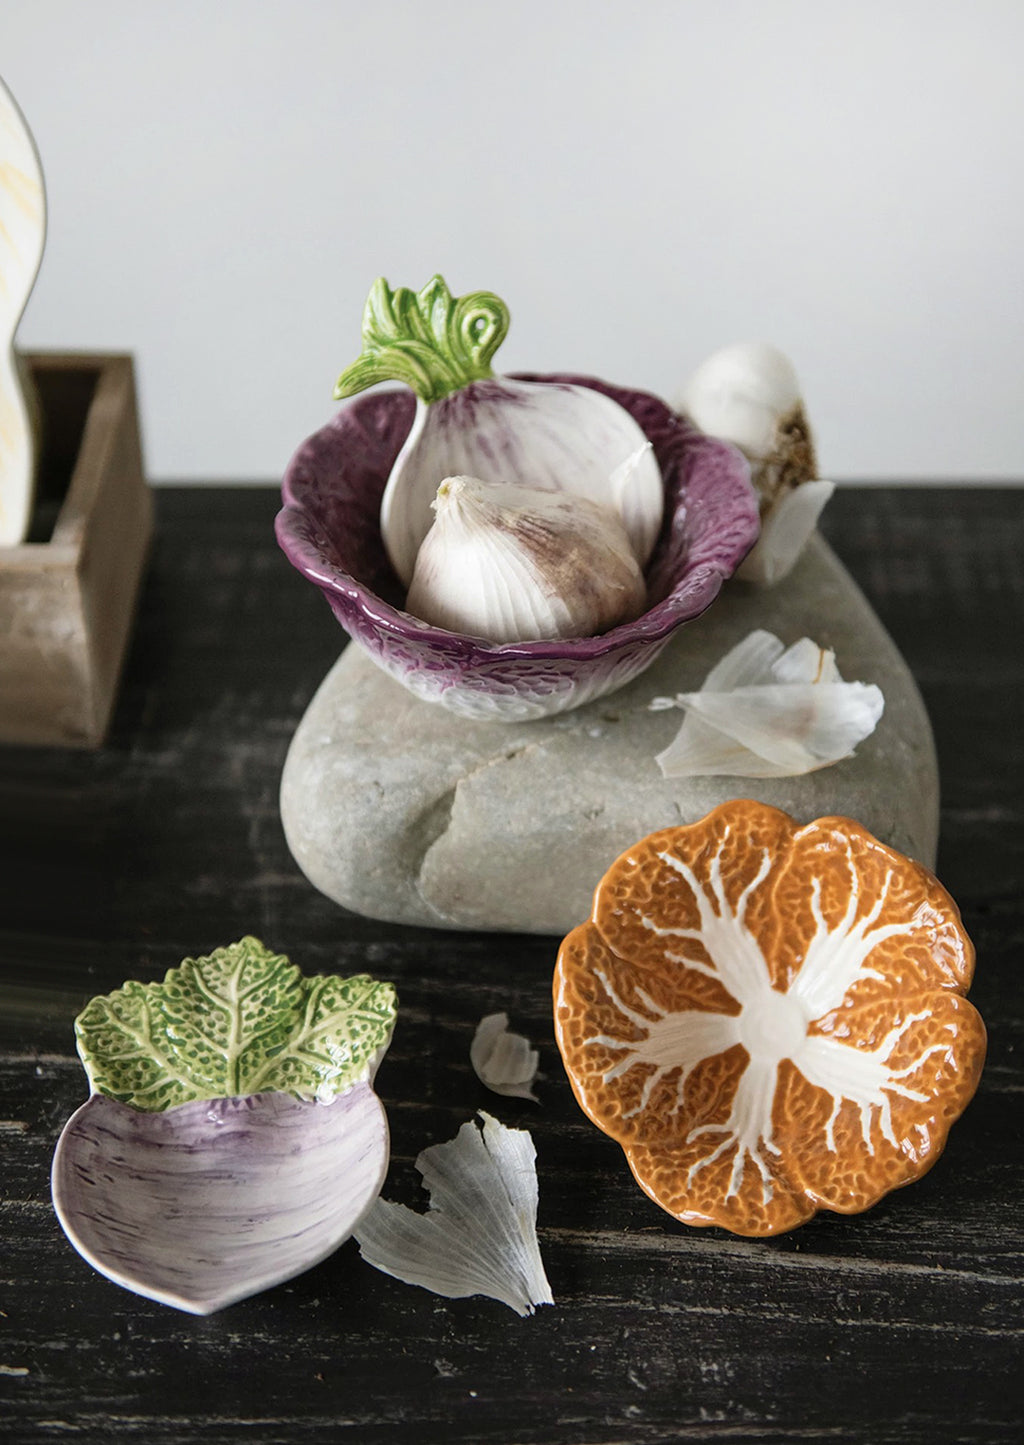 3: A pair of ceramic nesting bowls that look like orange and purple cabbage.